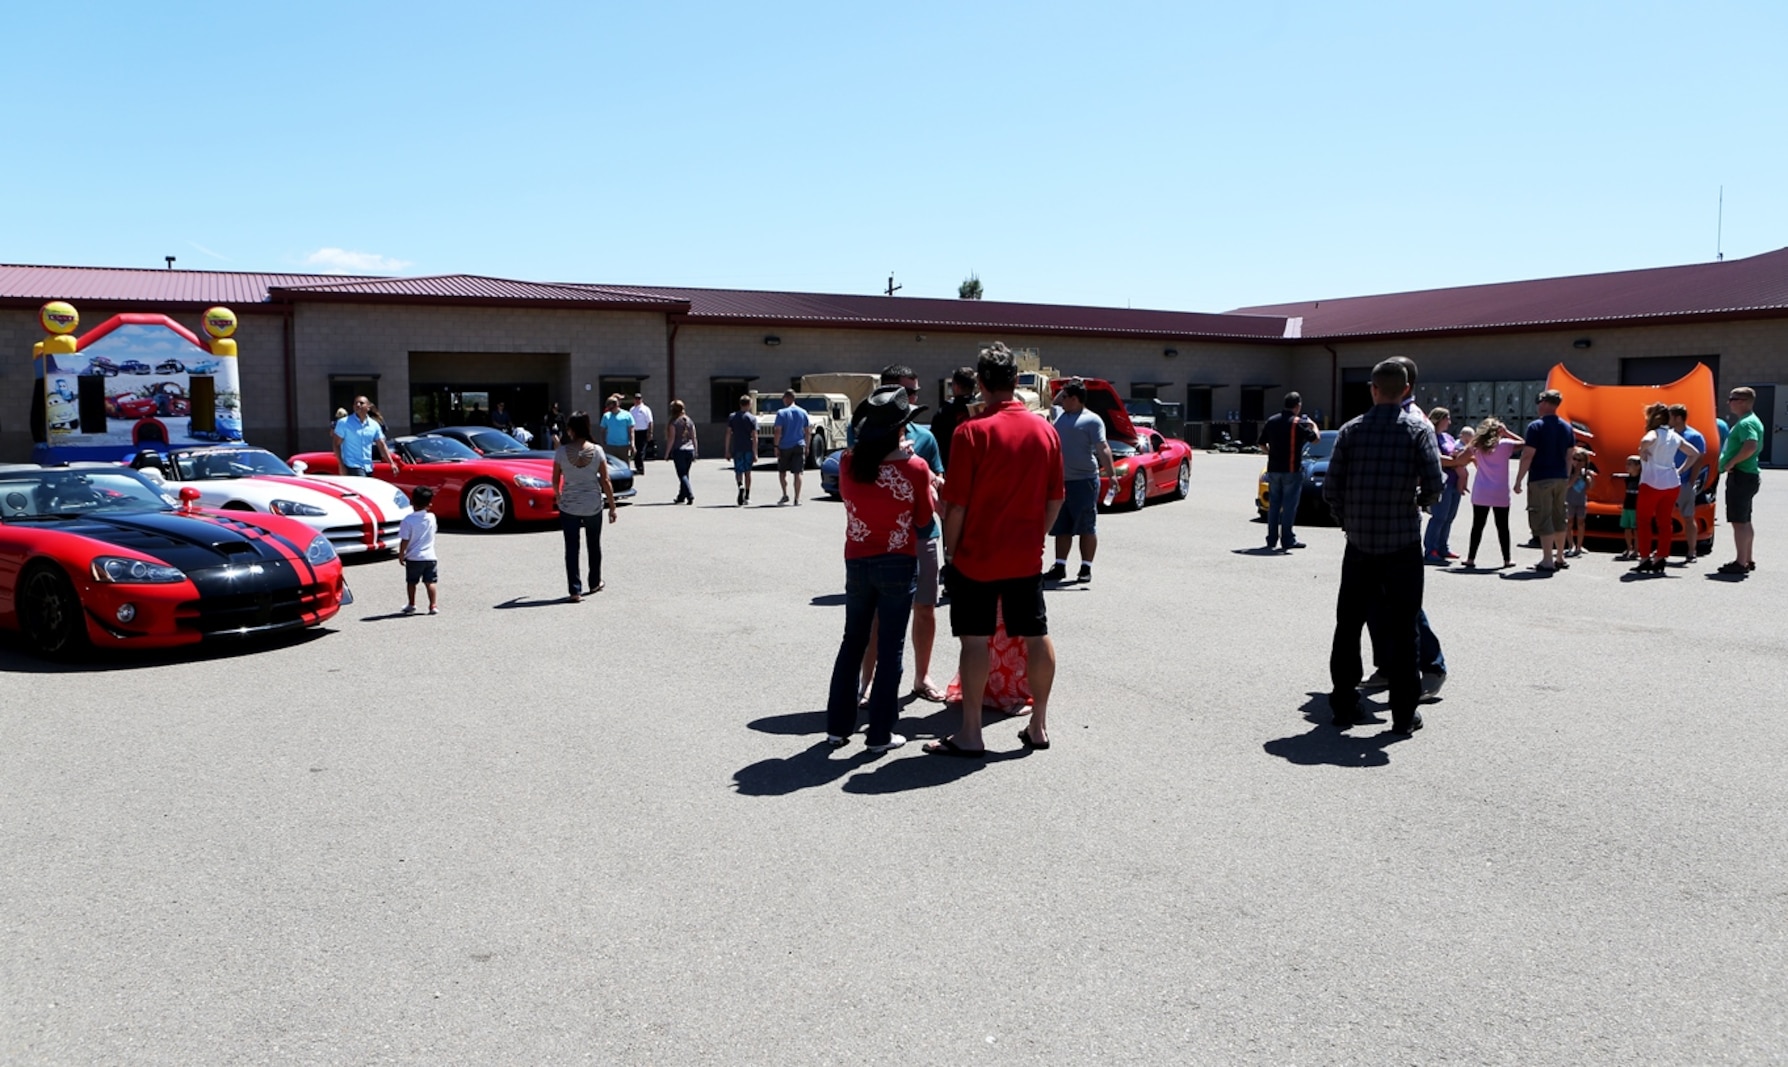 Marines and their families look at a line-up of show cars during a family day hosted by 1st Explosive Ordnance Disposal Company, 7th Engineer Support Battalion, 1st Marine Logistics Group, aboard Camp Pendleton, Calif., April 23, 2016. Marines with 1st EOD Co. hosted the Viper Club of Southern California for the day as a part of their celebration which included food, family activities, and various show cars. (U.S. Marine Corps photo by Cpl. Carson Gramley/released)